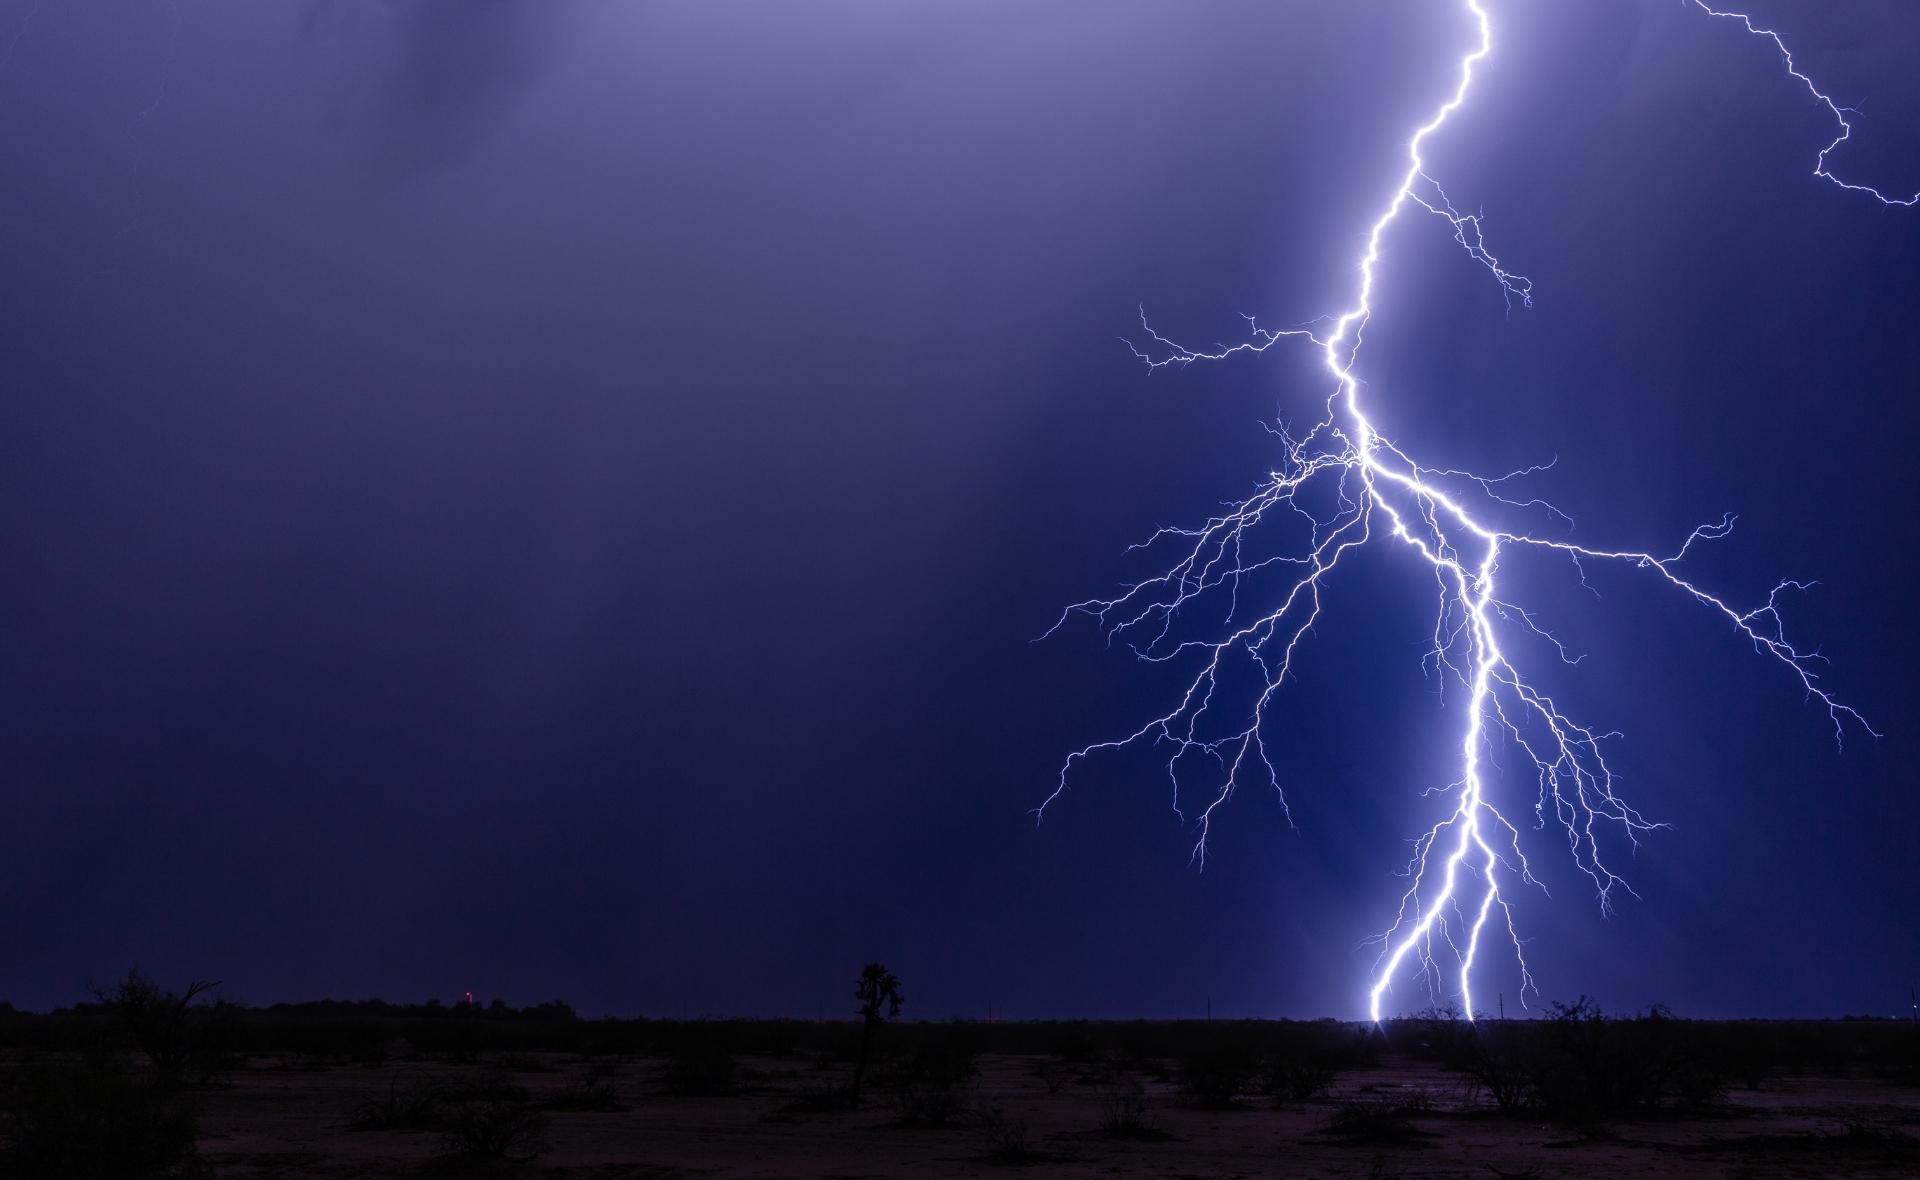 Lightning is powerful and dangerous. How safe is an rv in a lightning storm?